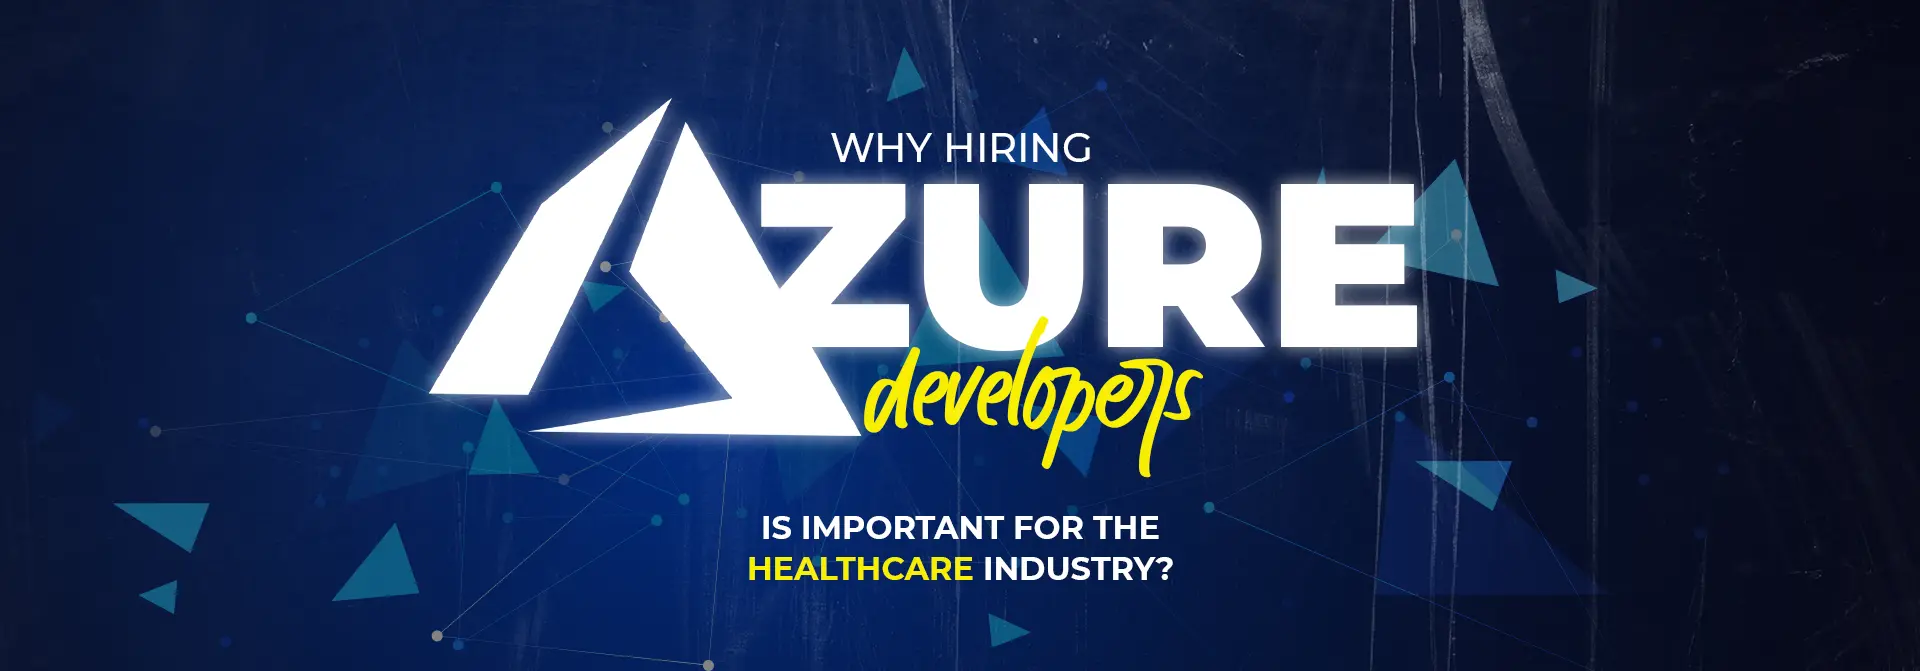 PAC Blog_Why Hiring Azure Developers is Important for the Healthcare Industry_main banner copy